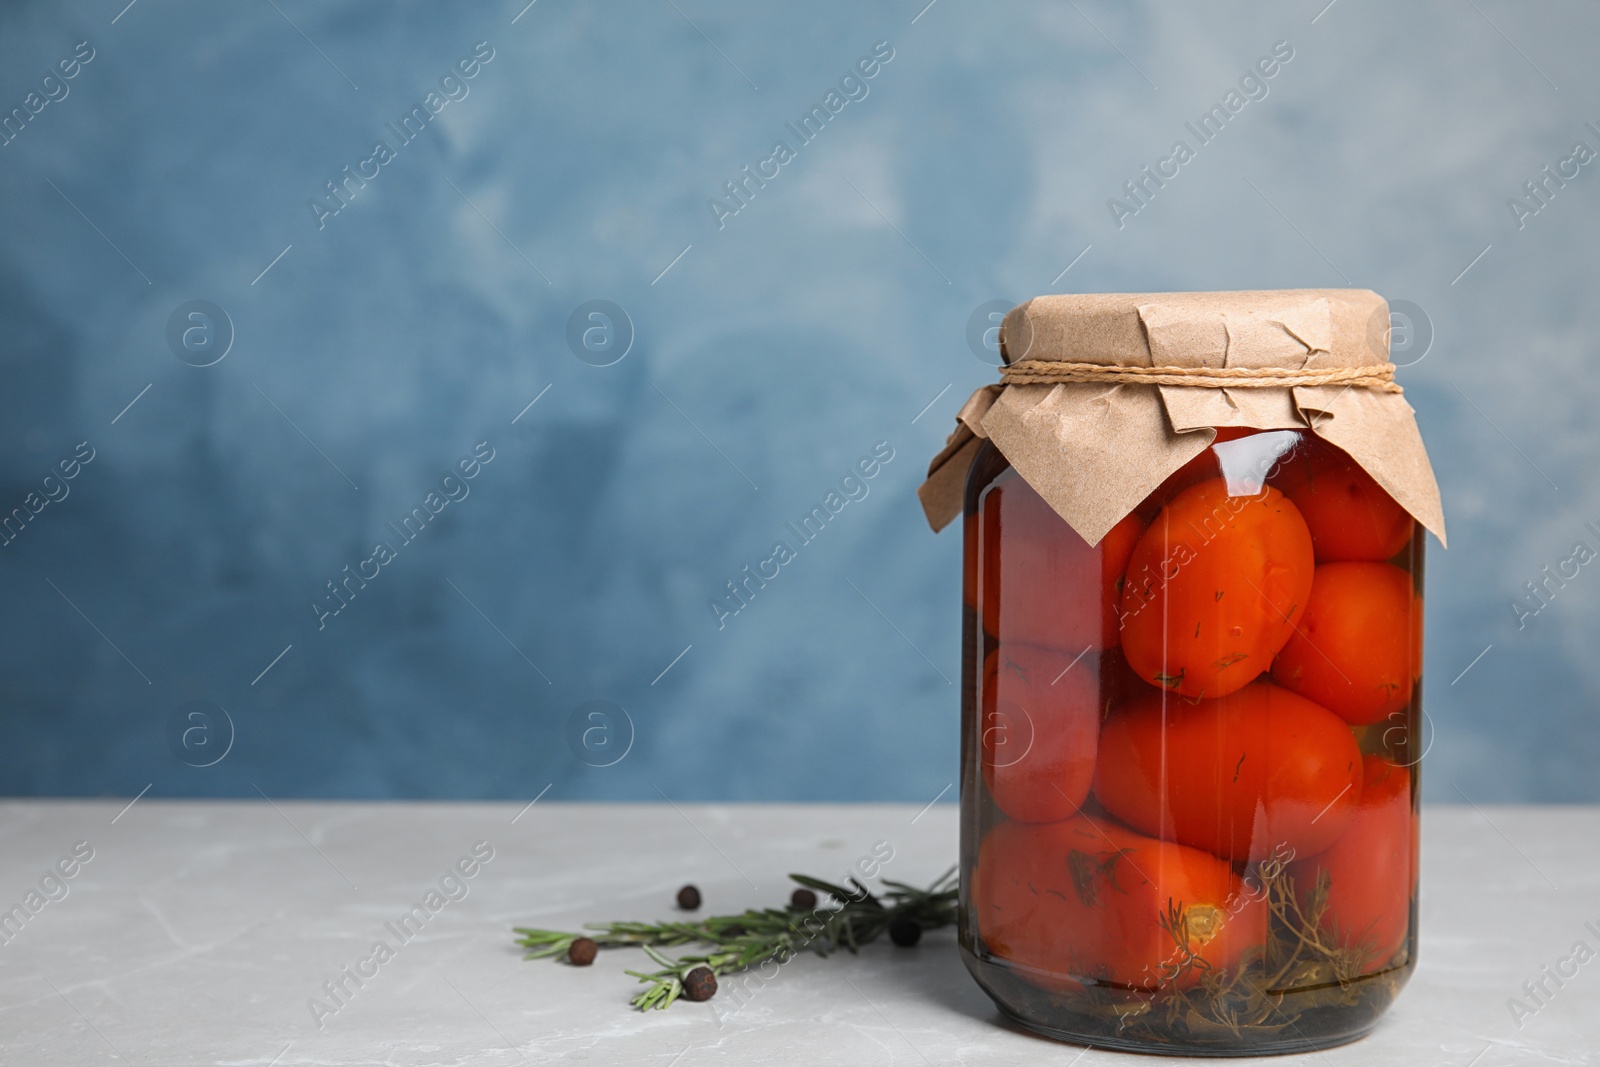 Photo of Pickled tomatoes in glass jar on grey table against blue background, space for text